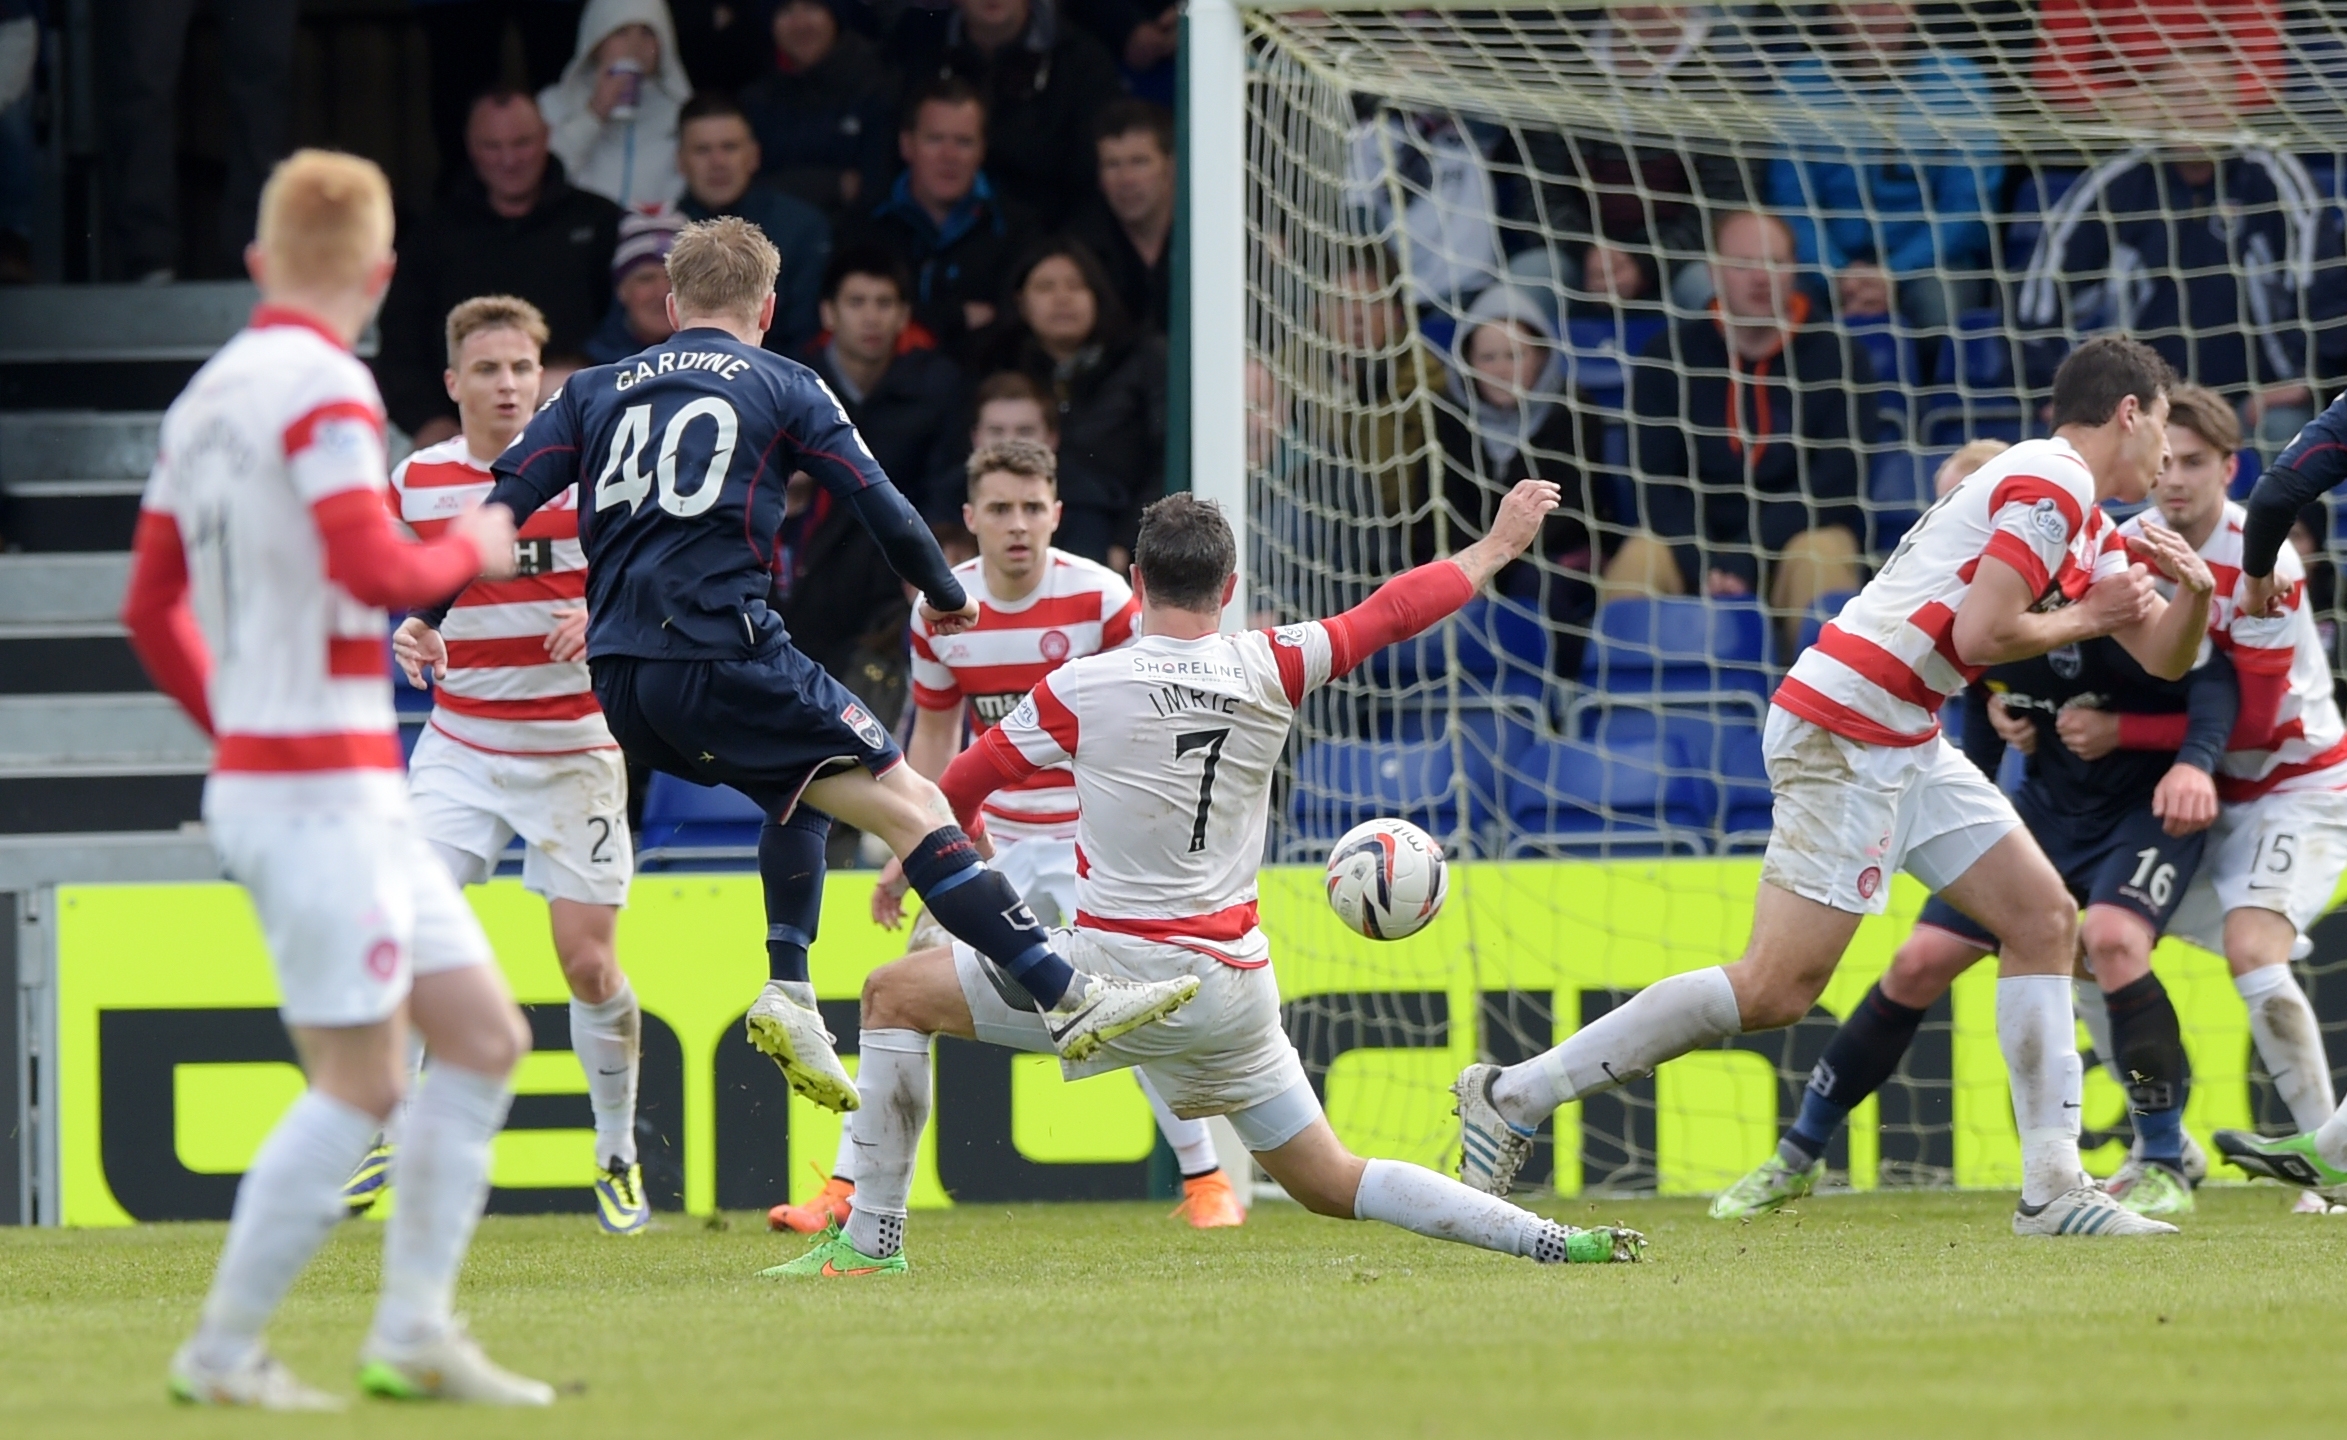 Ross County's Michael Gardyne strikes from outside the box to equalise